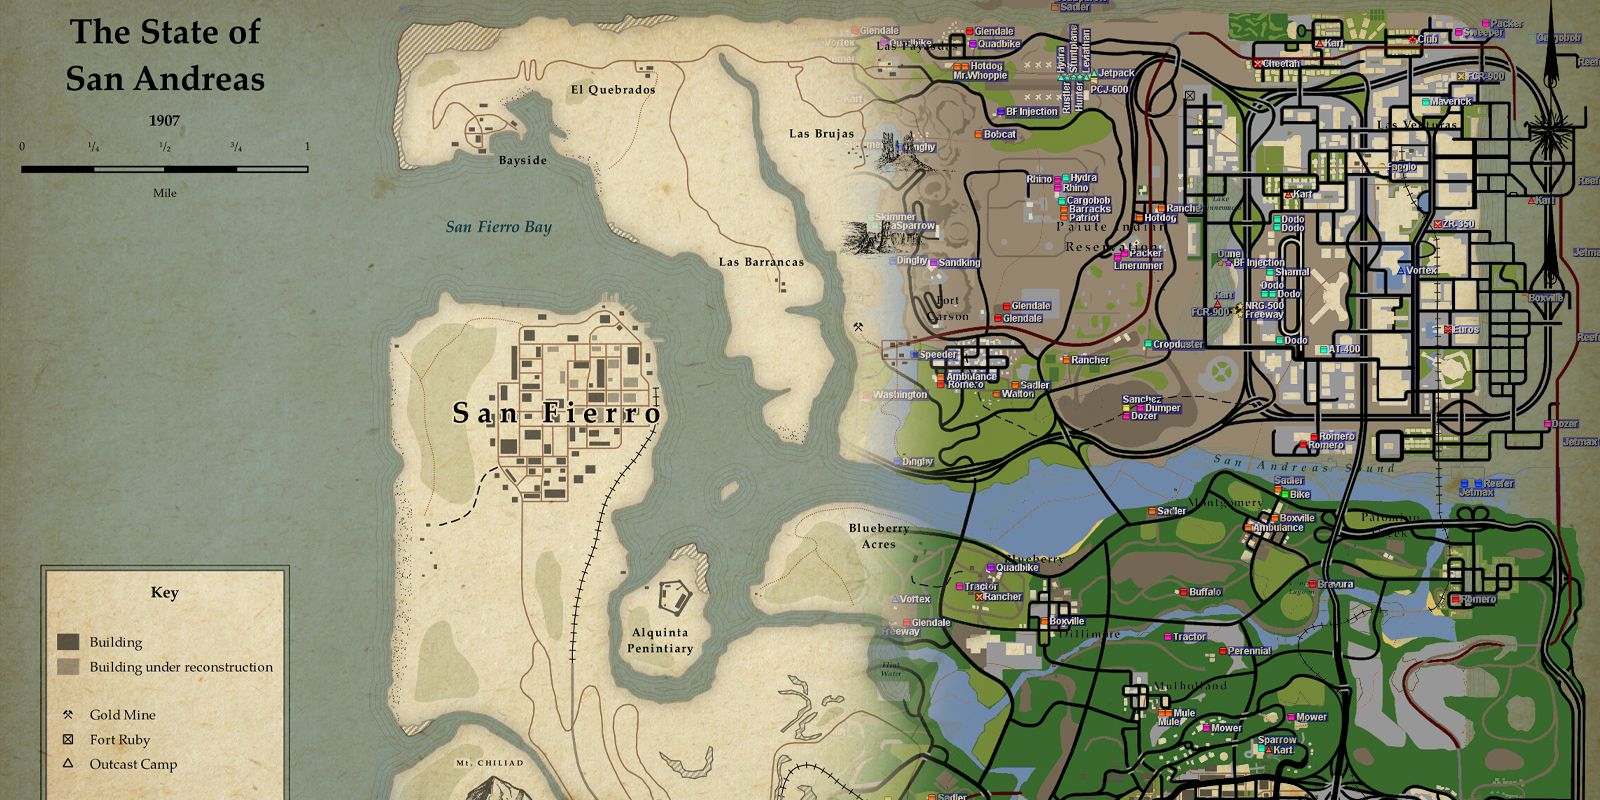 Grand Theft Auto Map visited San Andreas in 1907